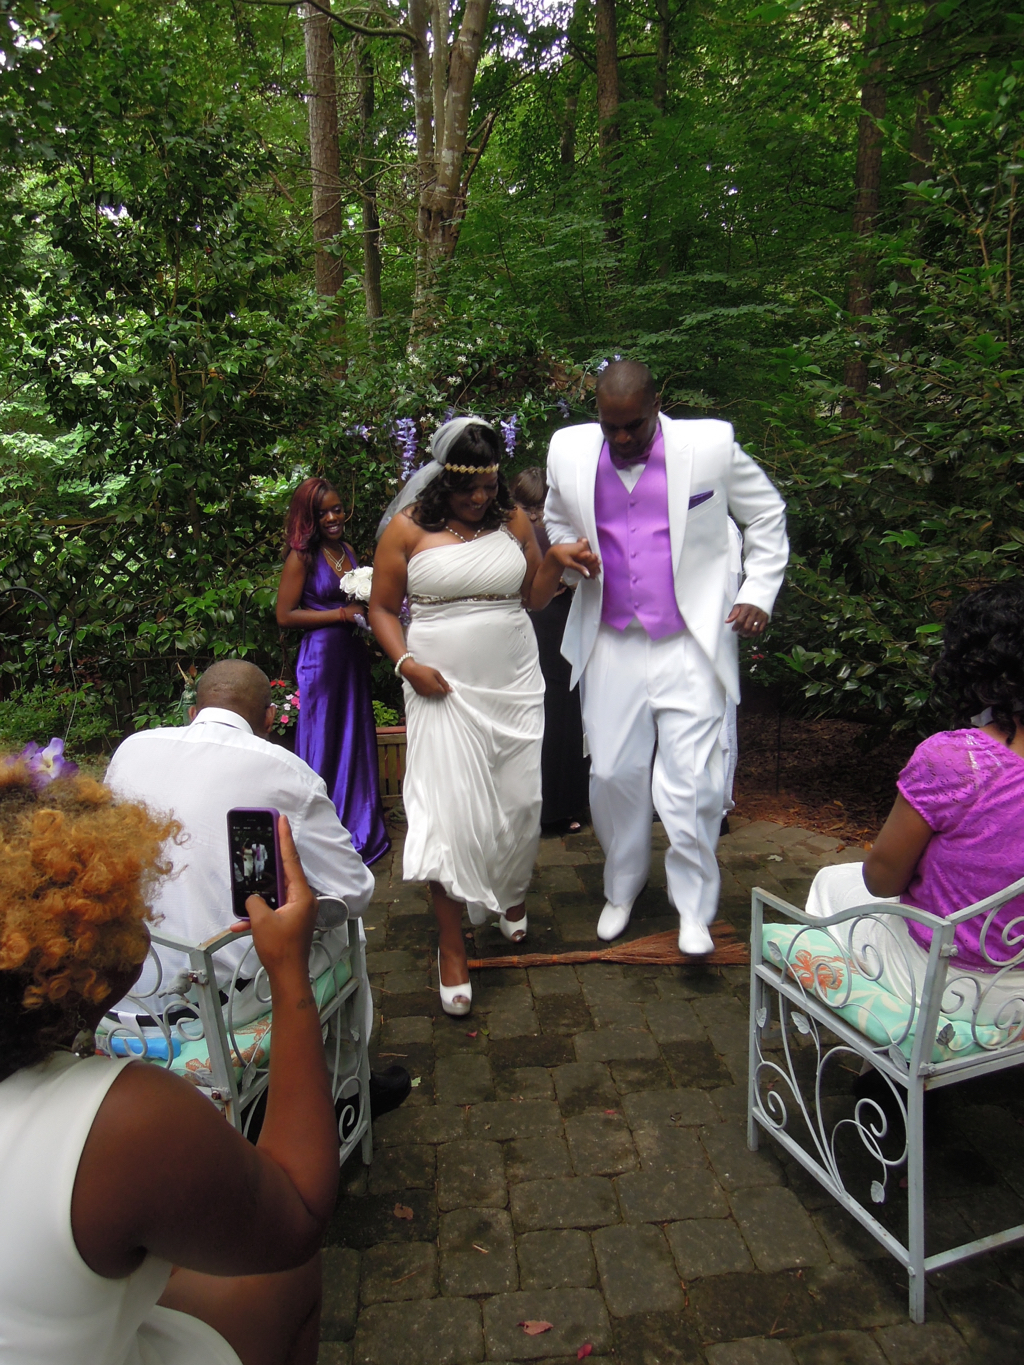 Jumping the broom! 